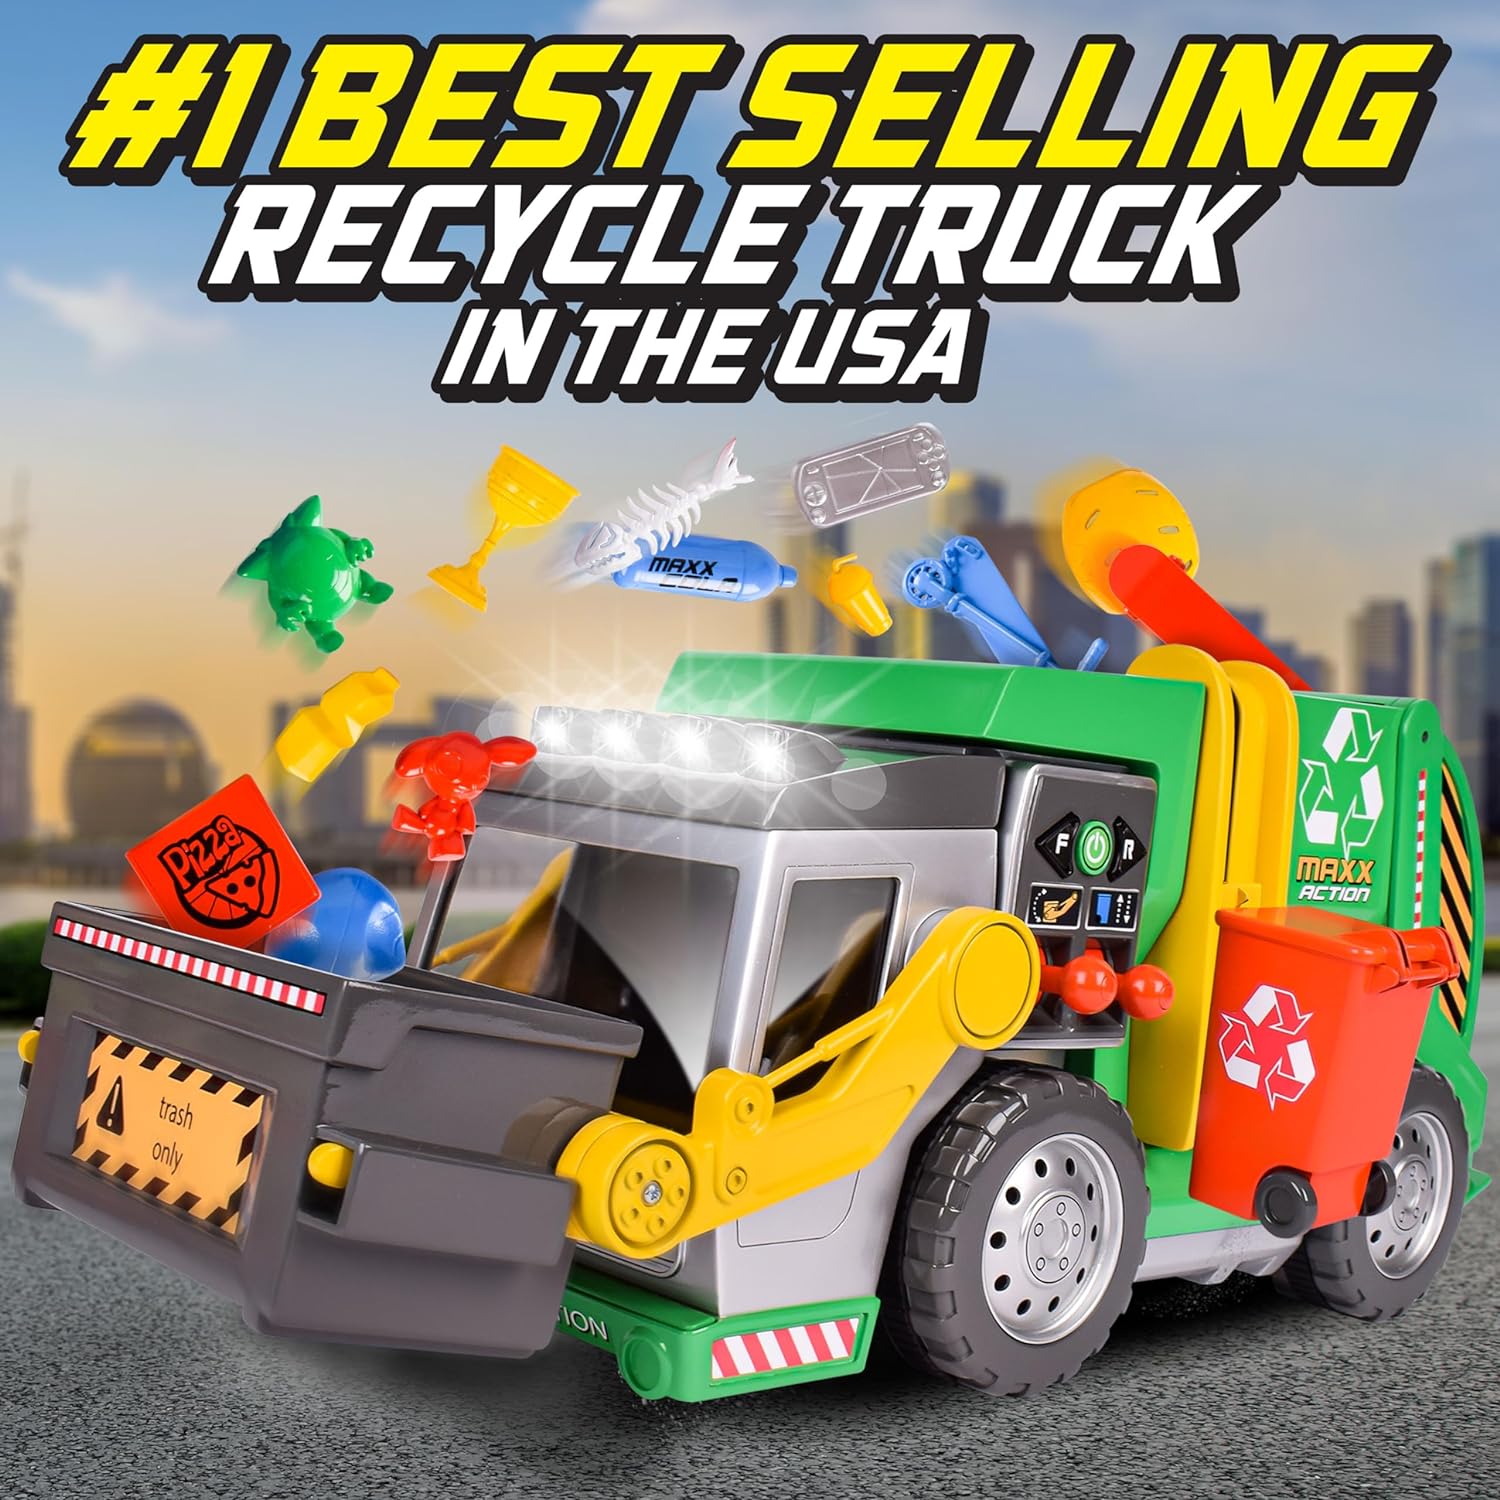 Sunny Days Entertainment Maxx Action 19’’ 3-N-1 Maxx Recycler – Large Garbage Truck Toy with Lights, Sounds and Motorized Drive | Realistic Trash Truck with Dual Joystick Controllers